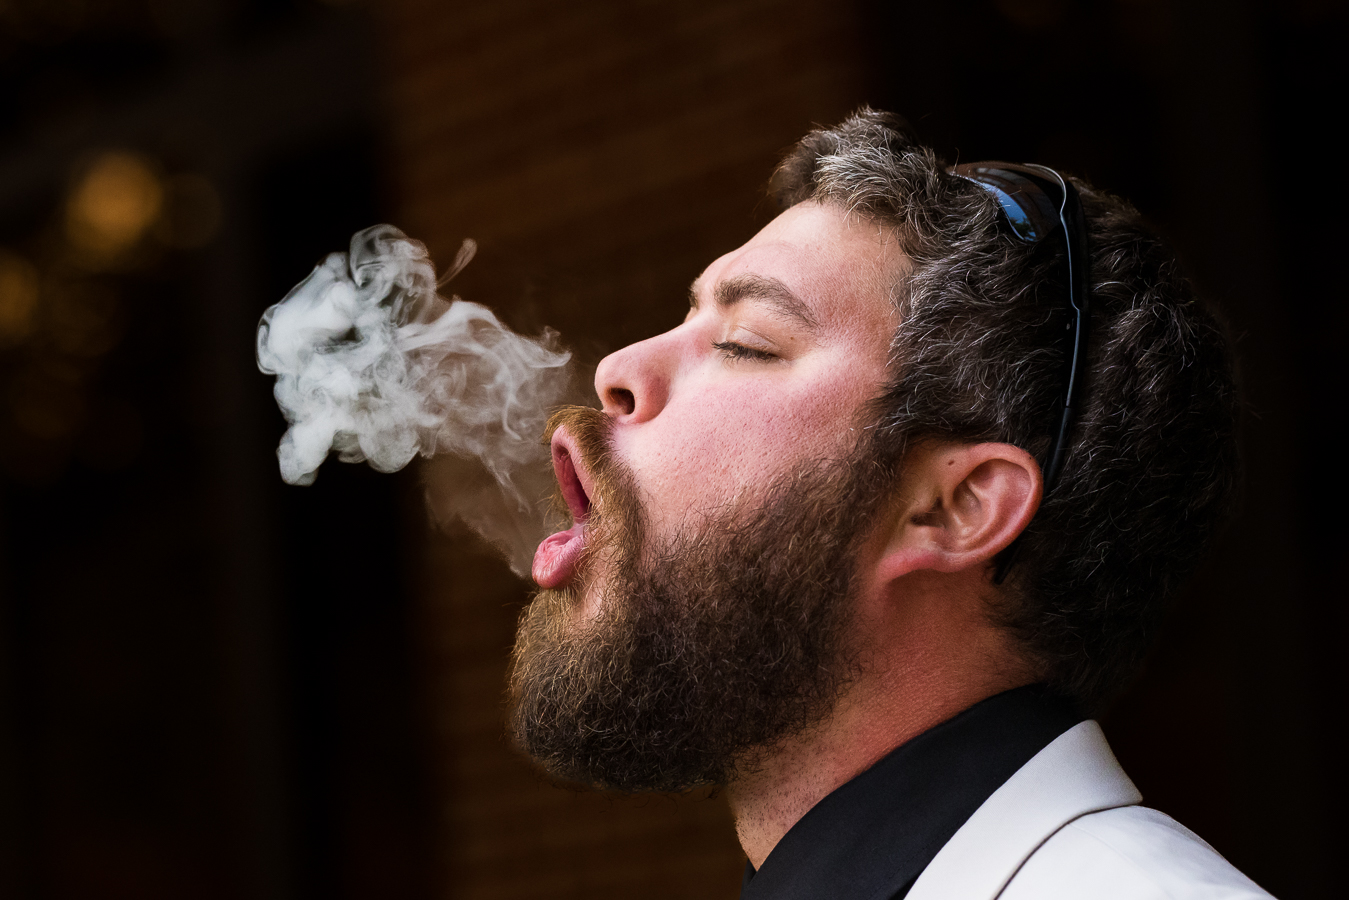 creative Cork Factory Hotel Wedding Photographer, lisa rhinehart, captures this unique image of a groomsmen as he blows smoke into their air before heading into the reception 